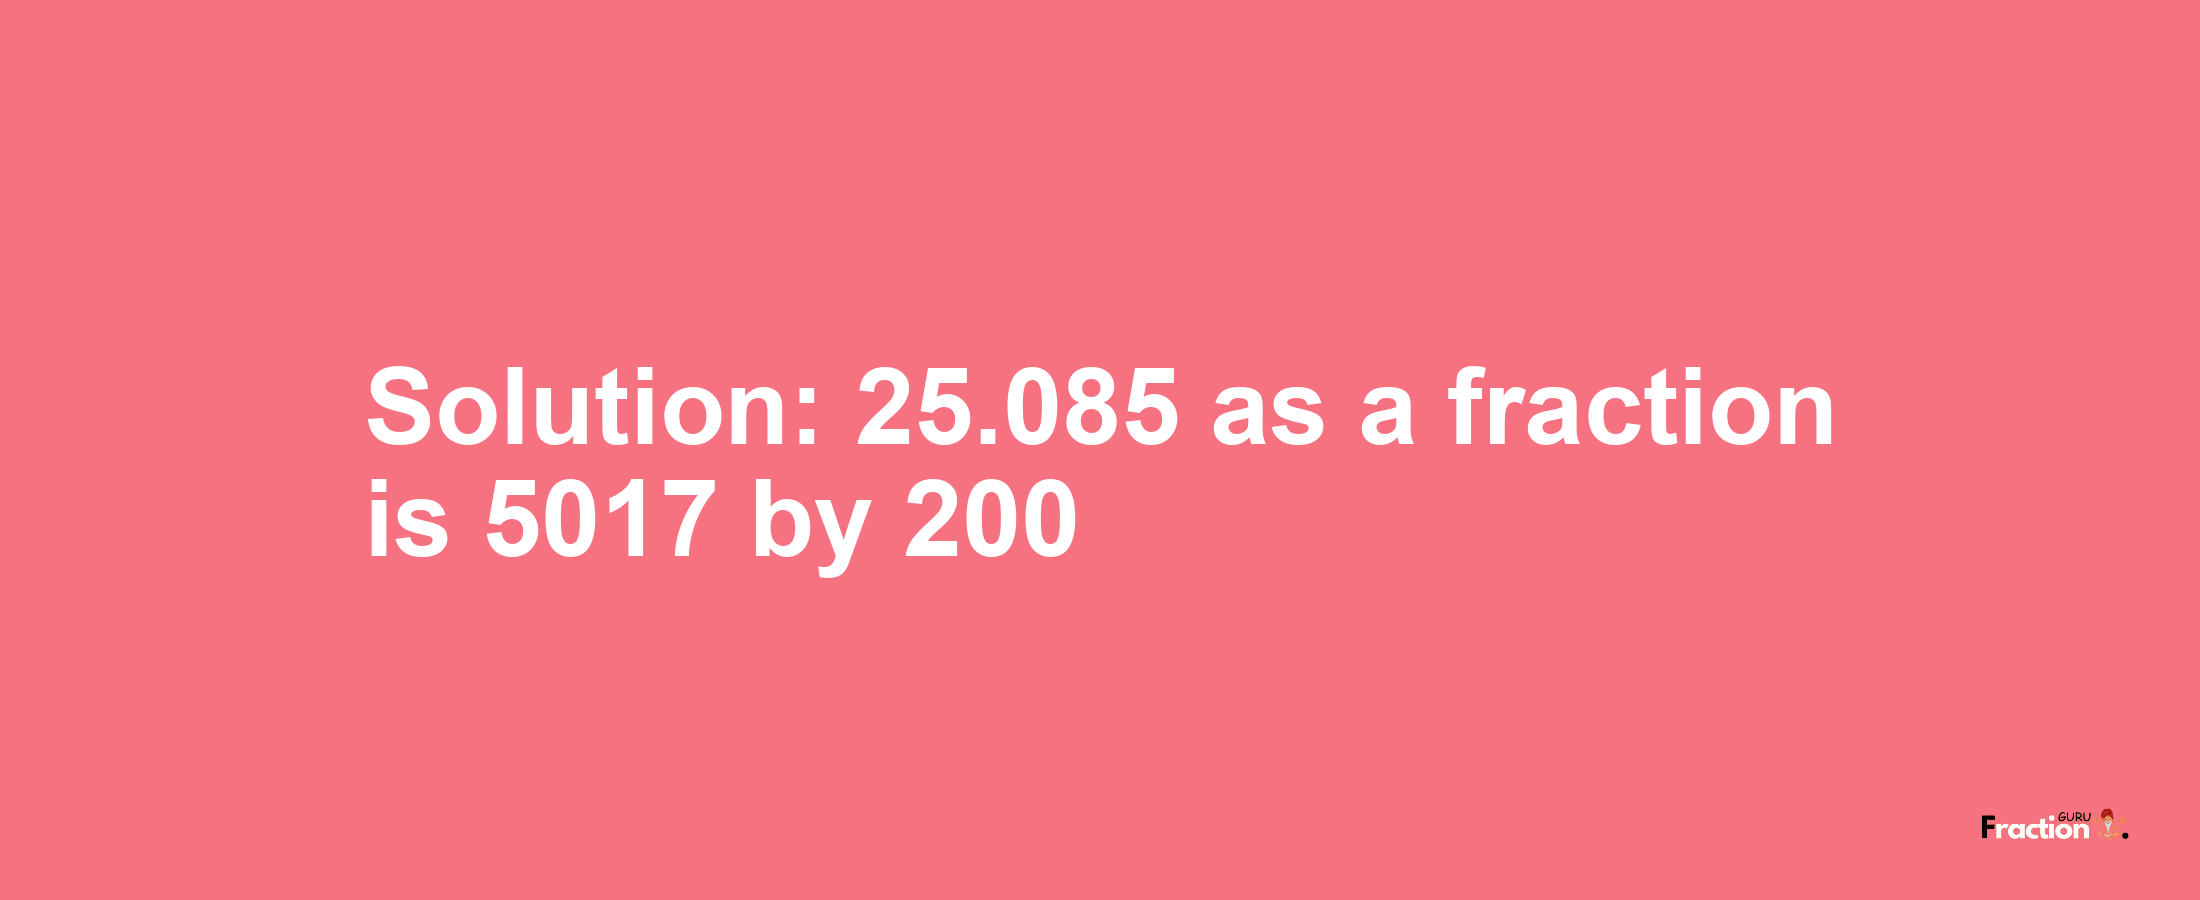 Solution:25.085 as a fraction is 5017/200